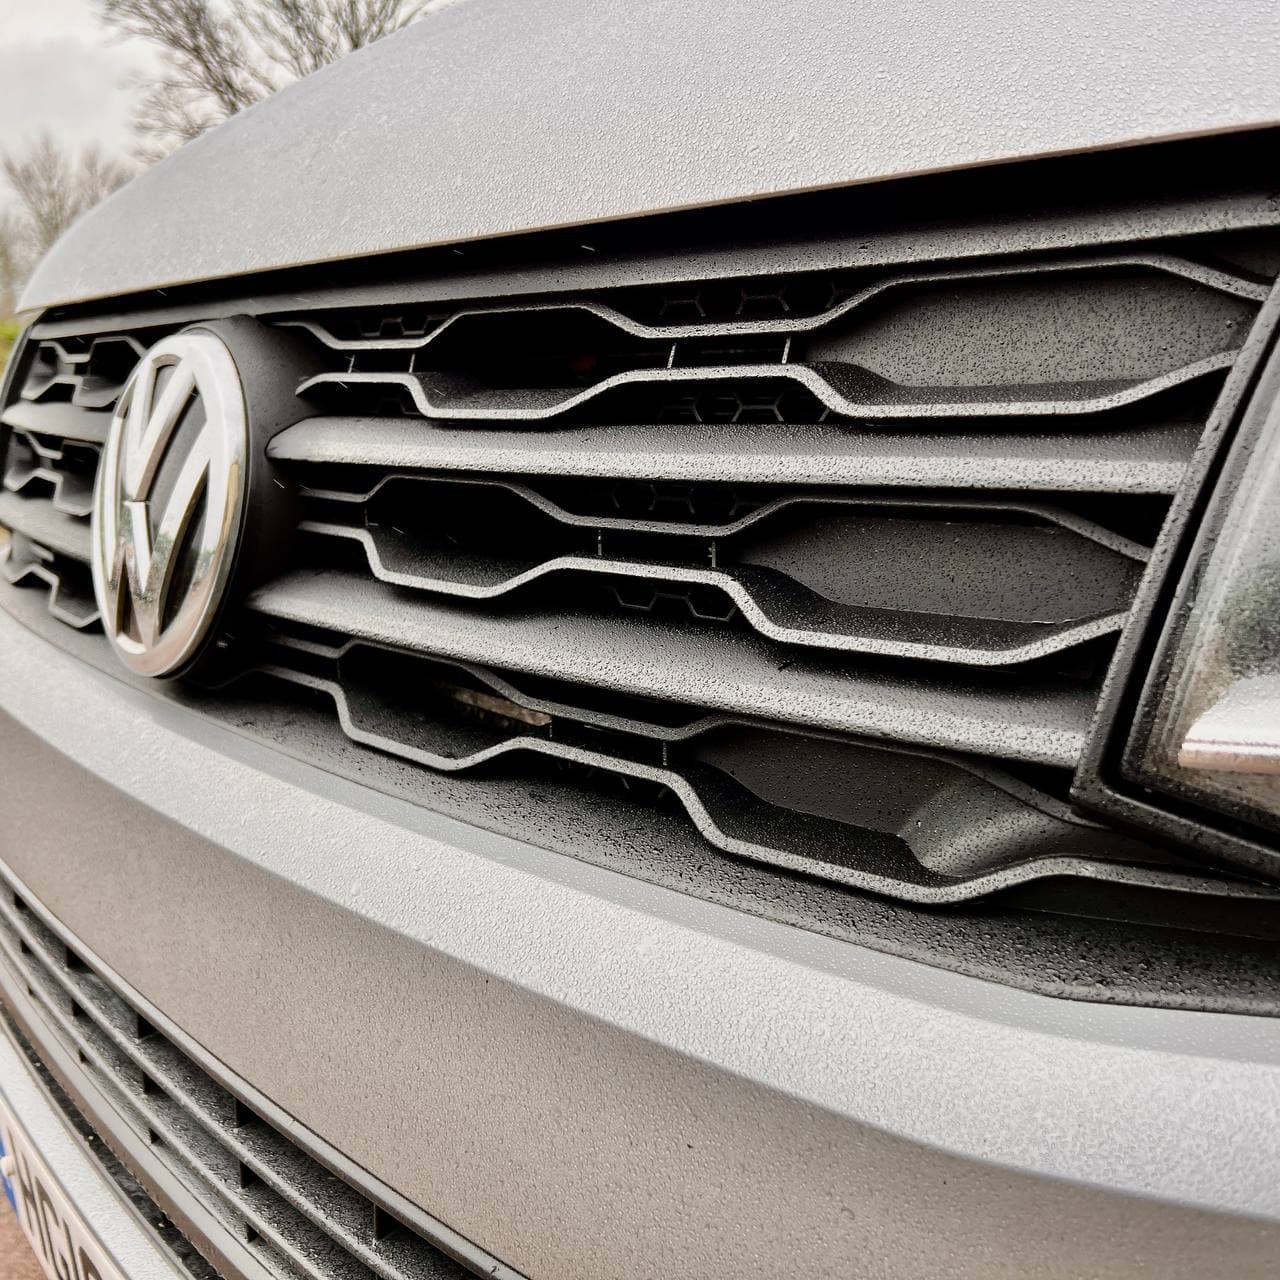 VW T6 R-Line Front Grille (2 in 1) Badged/Badgeless - Gloss Black